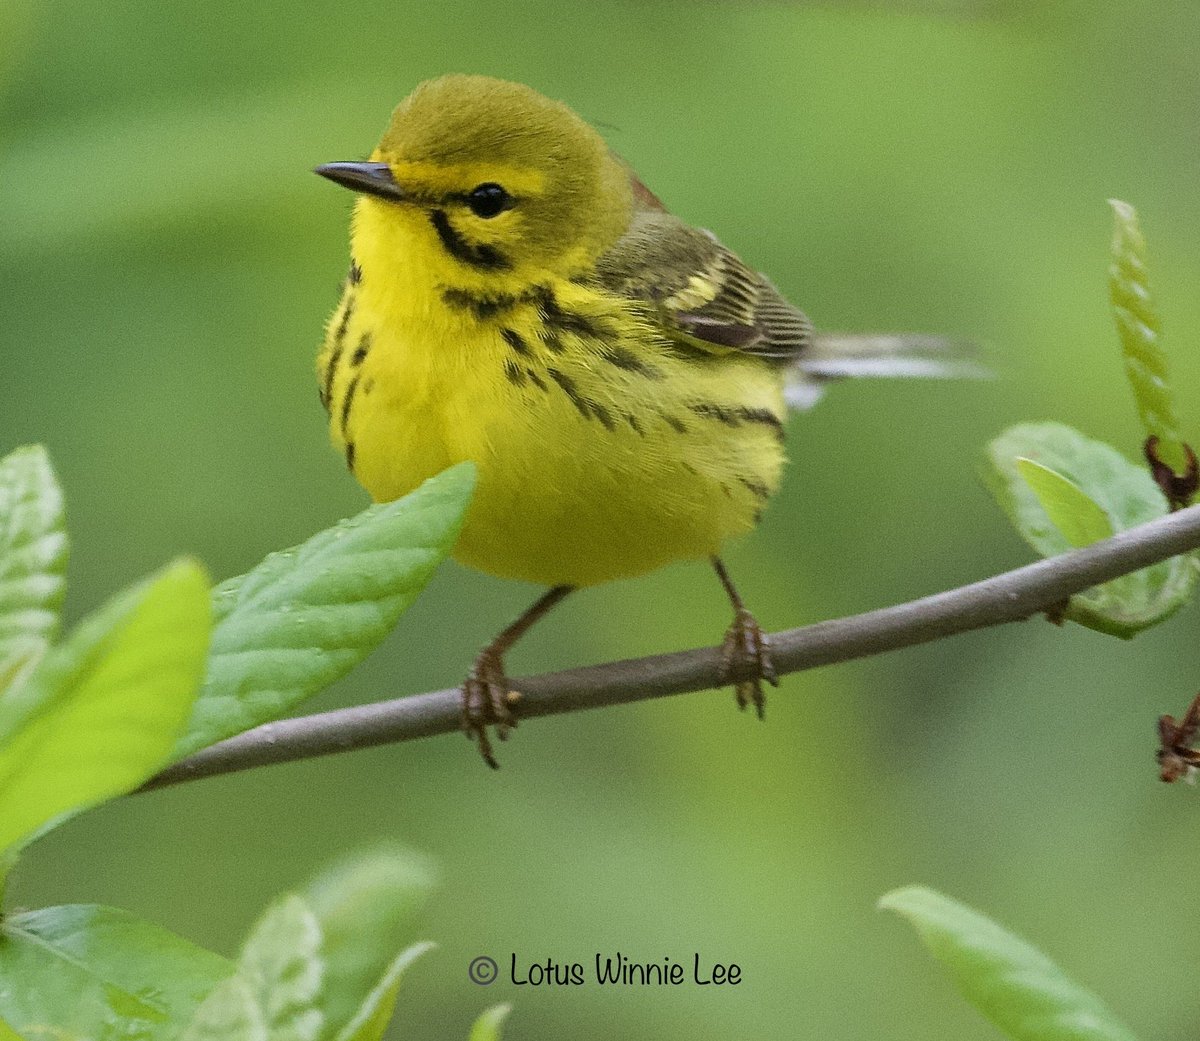 Another picture of the Prairie Warbler in the rain ⁦@GreenWoodHF⁩ today. Look at this awesomeness! 😍🥰 #prairiewarbler #warblers #birdwatching #wildlife